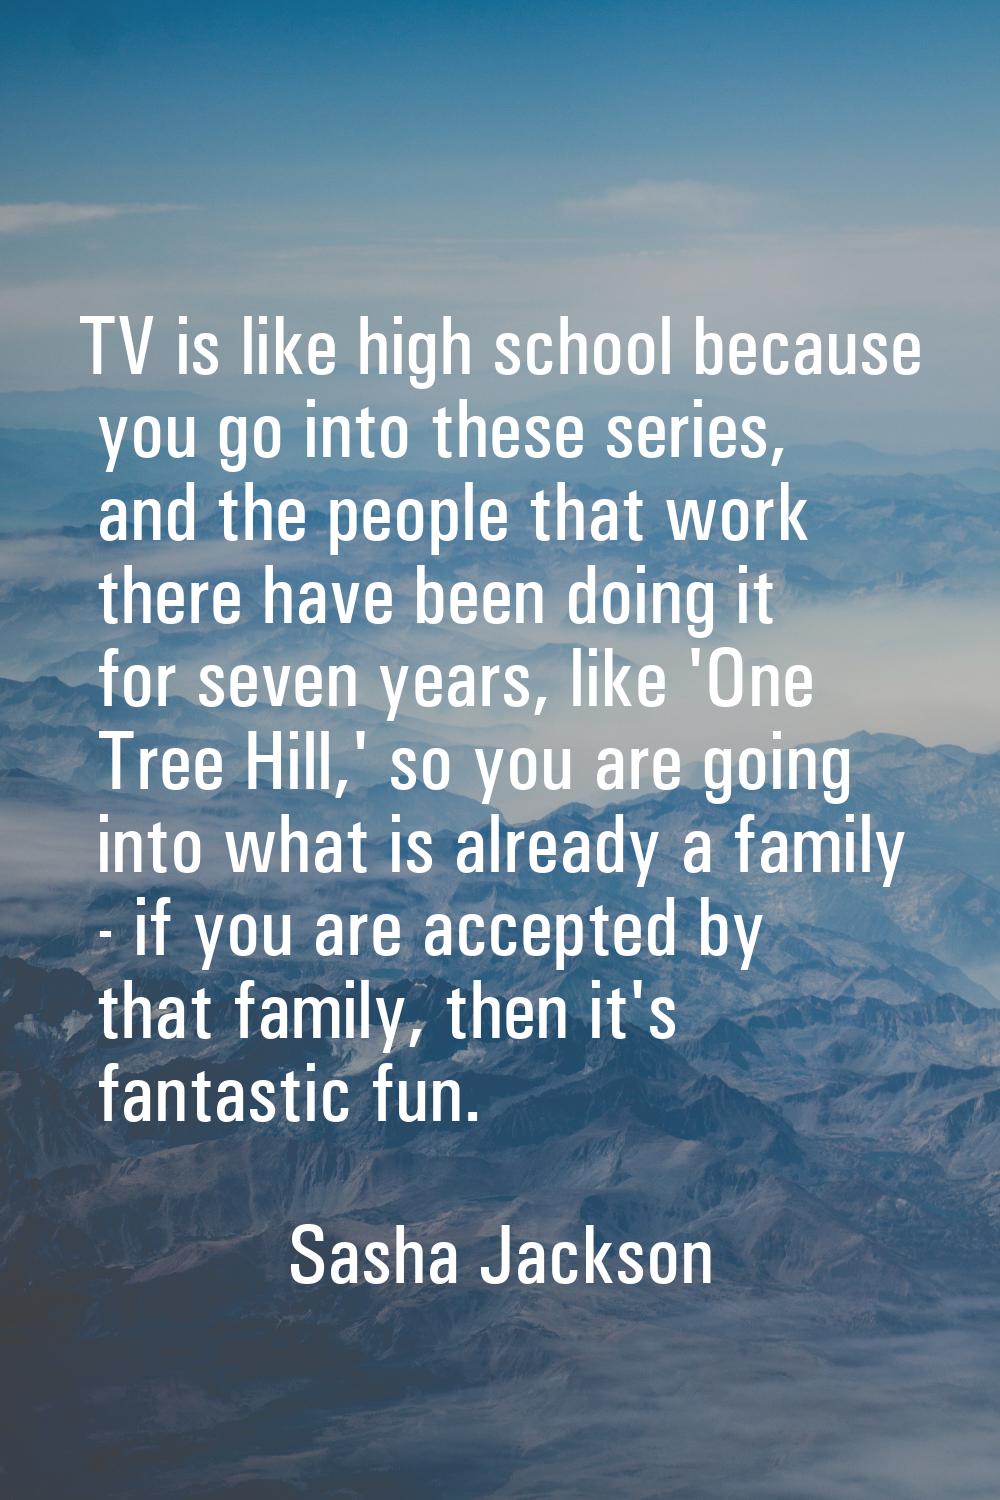 TV is like high school because you go into these series, and the people that work there have been d